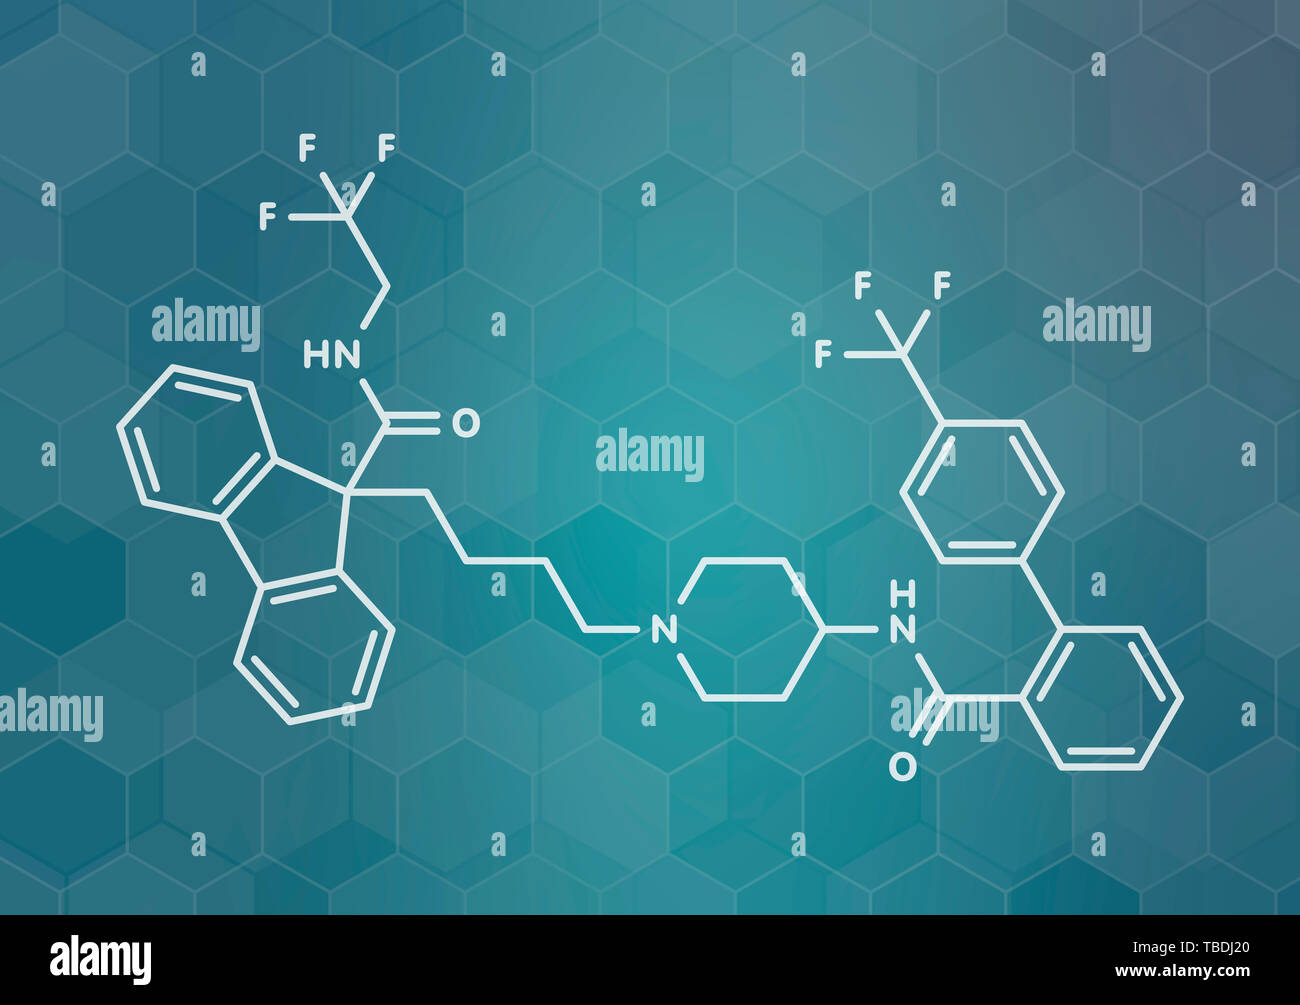 Lomitapide cholesterol lowering drug molecule. Used in treatment of homozygous familial hypercholesterolemia. White skeletal formula on dark teal gradient background with hexagonal pattern. Stock Photo